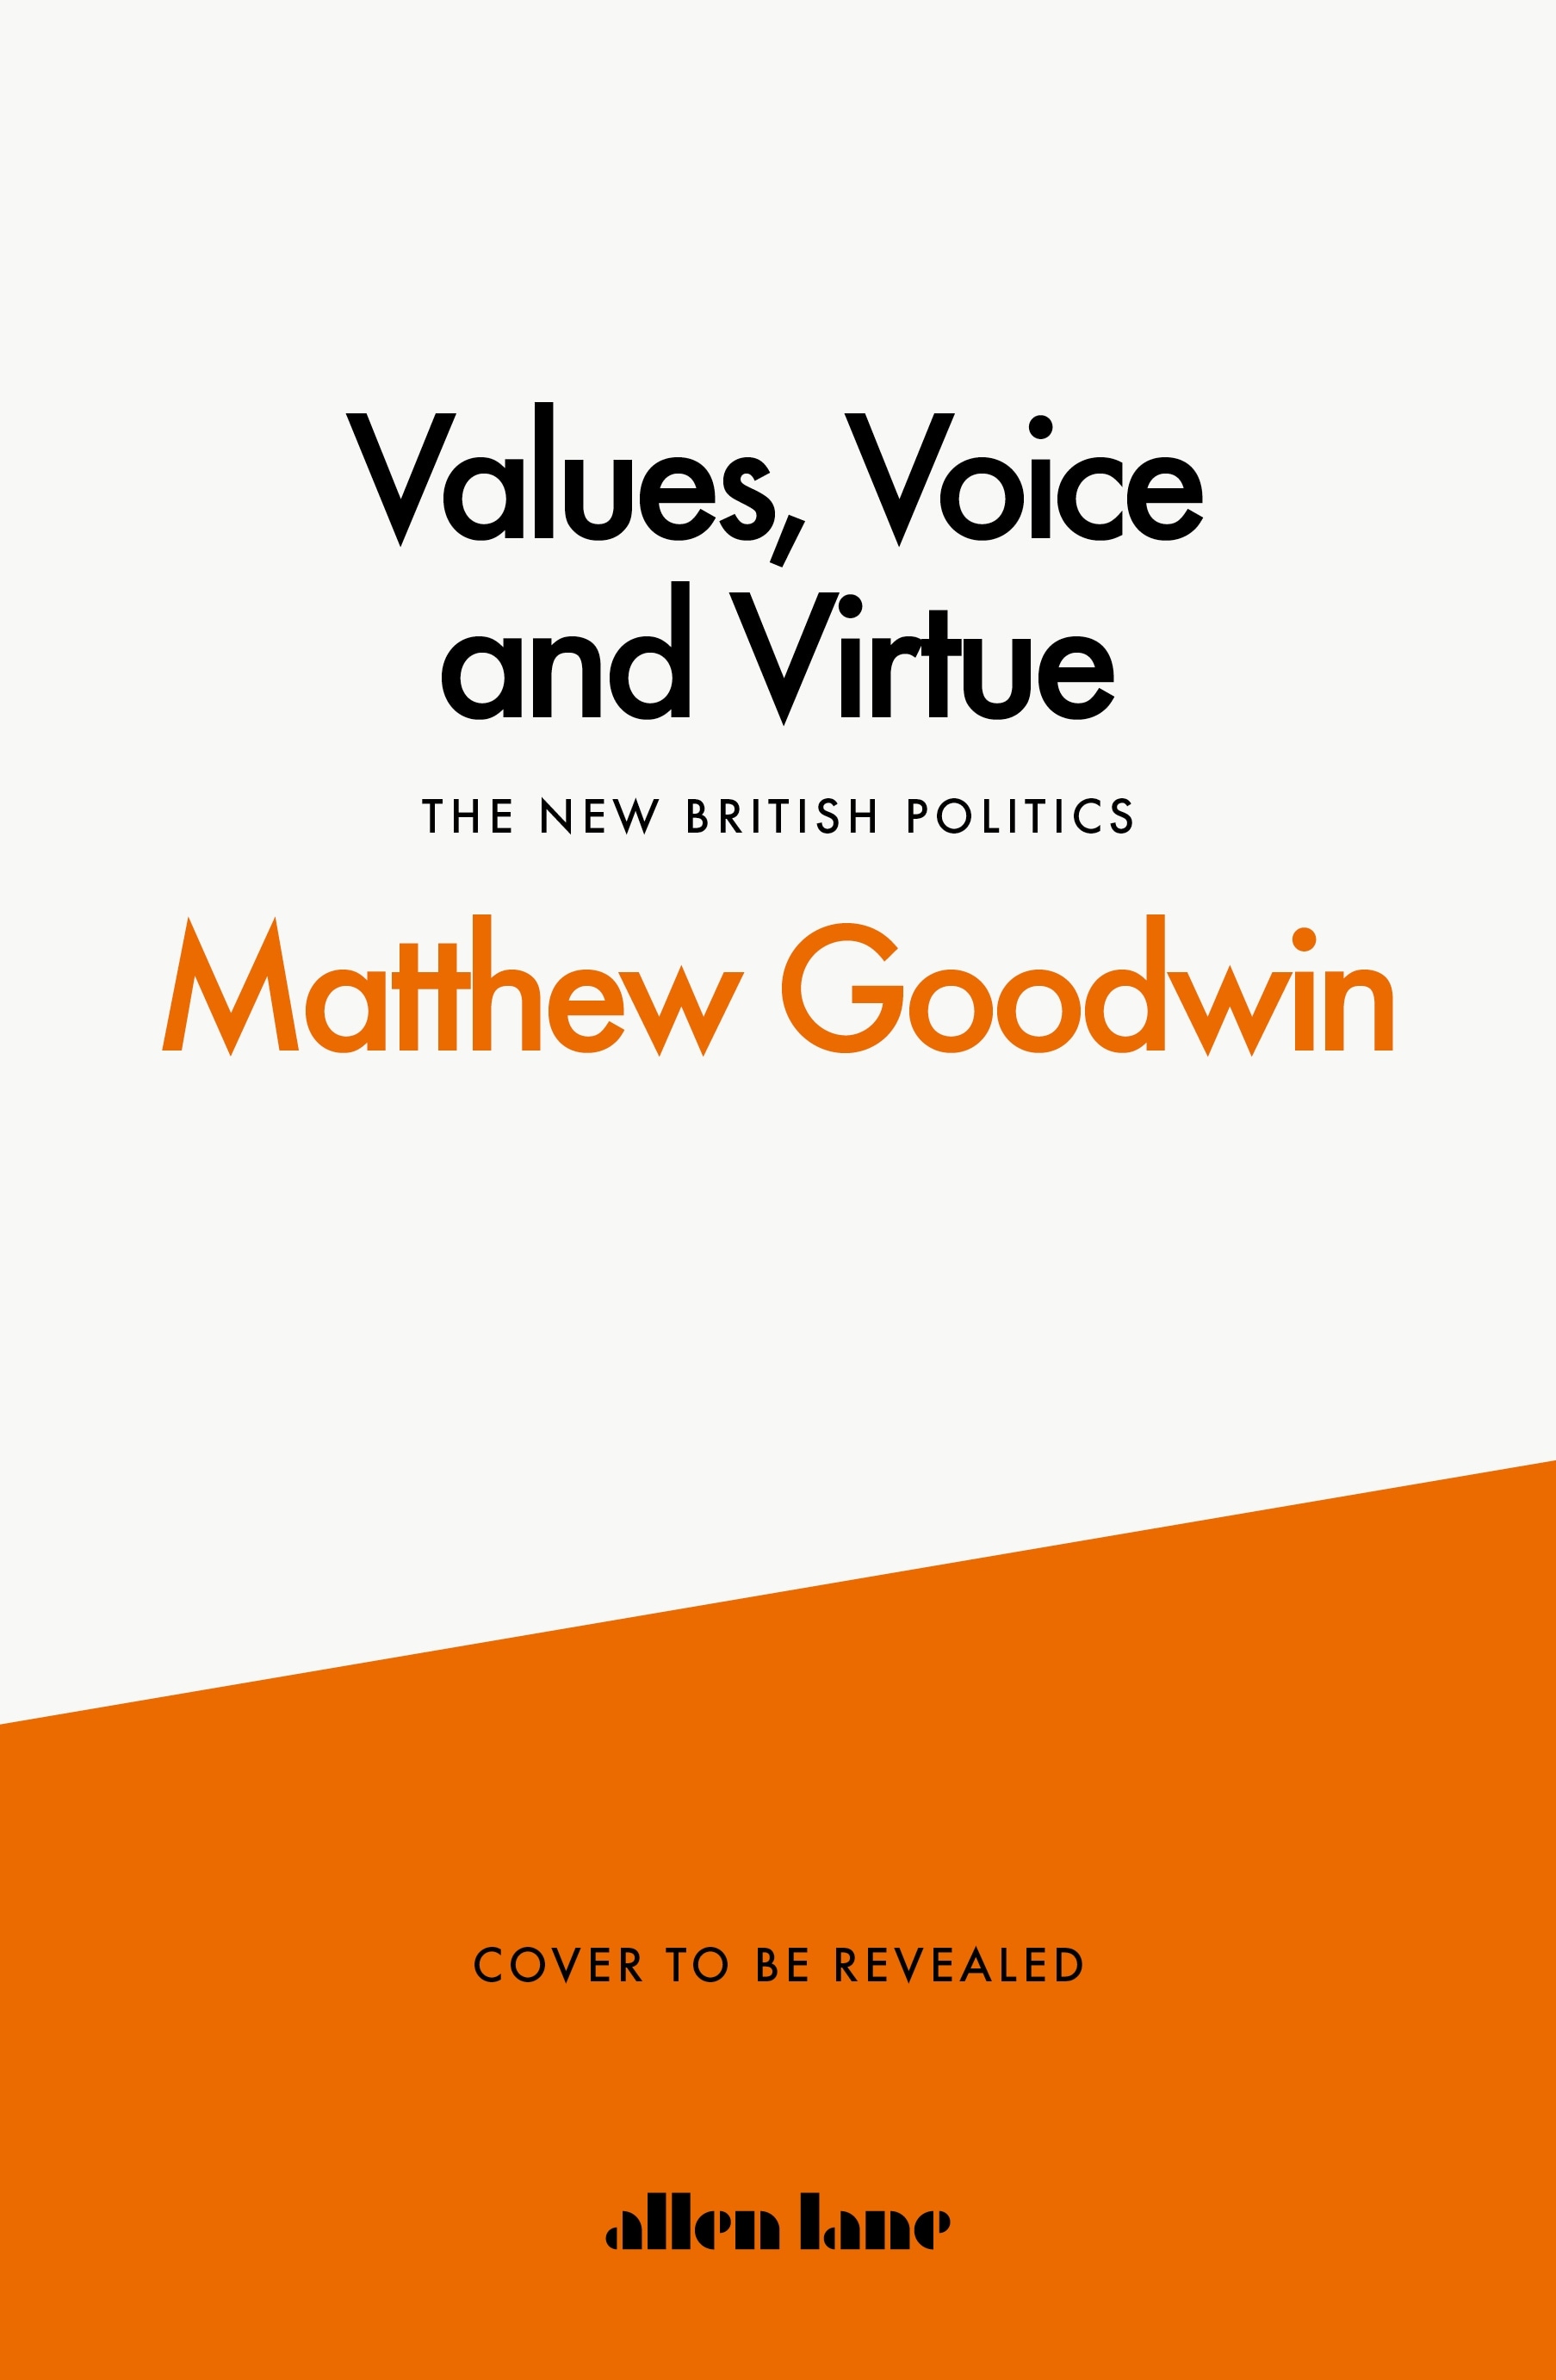 Book “Values, Voice and Virtue” by Matthew Goodwin — August 4, 2022